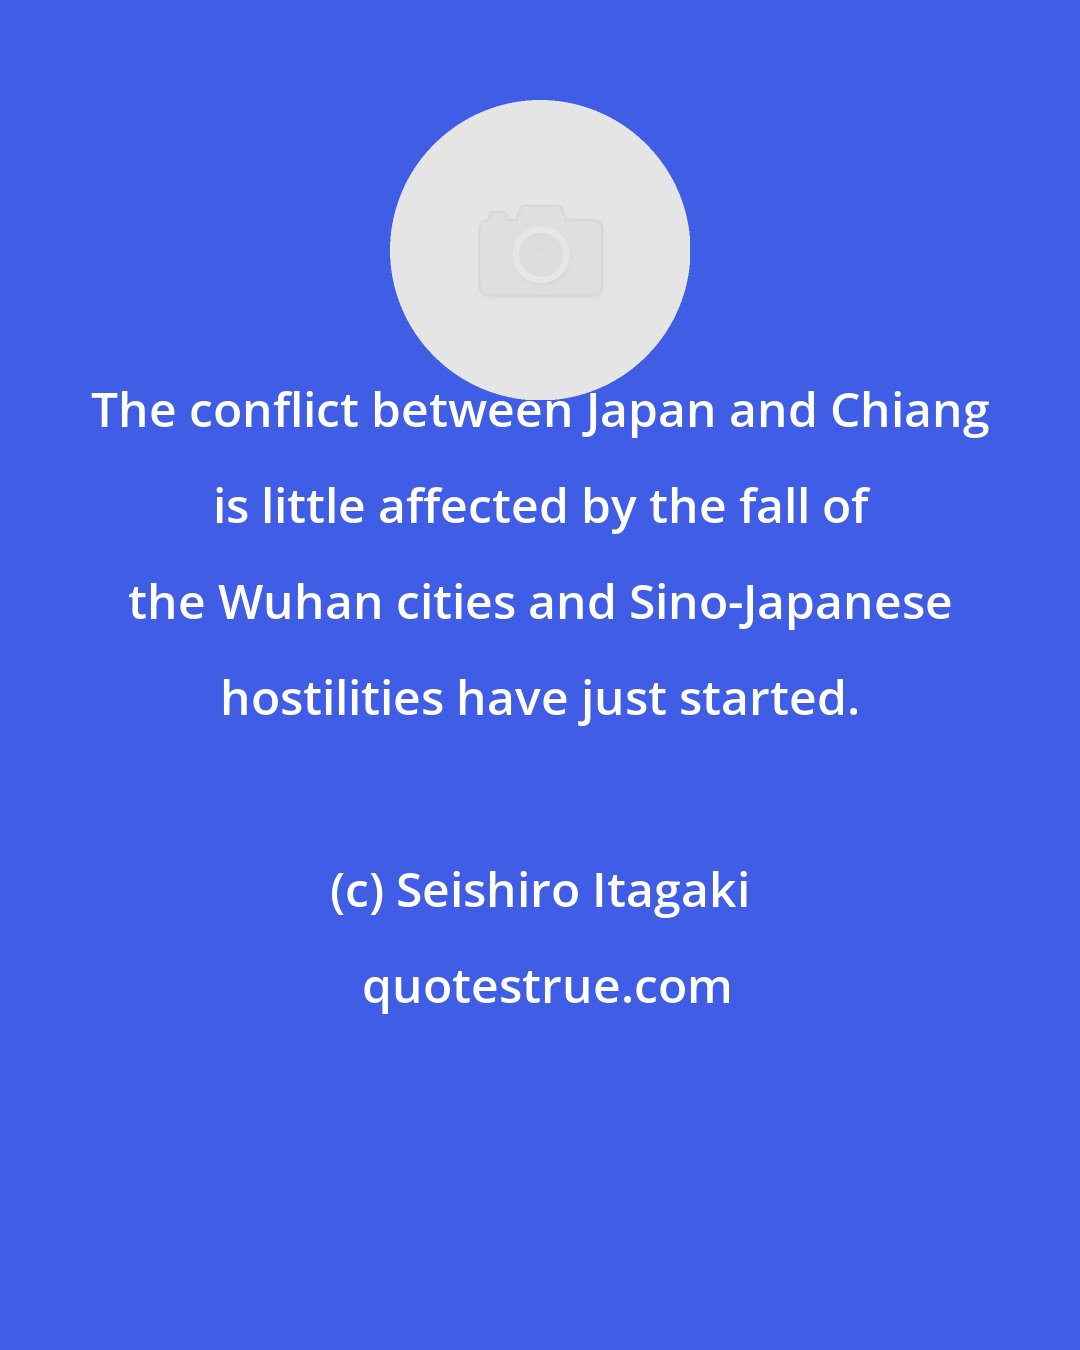 Seishiro Itagaki: The conflict between Japan and Chiang is little affected by the fall of the Wuhan cities and Sino-Japanese hostilities have just started.